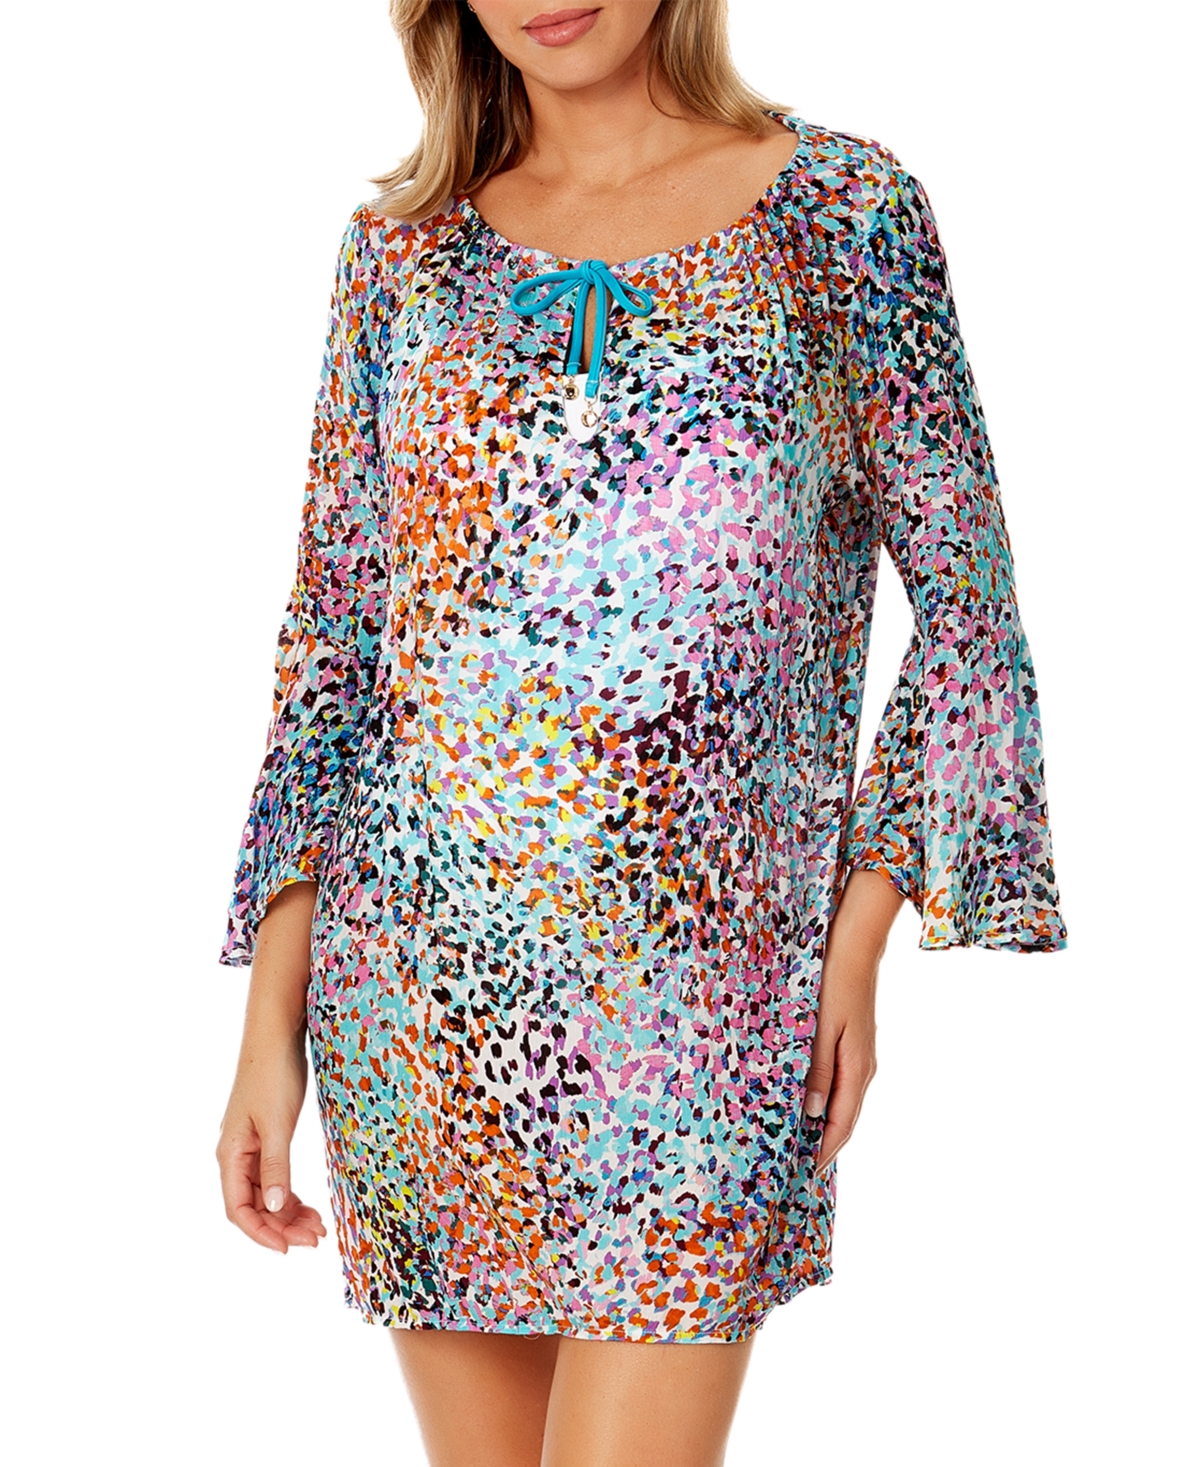 Women's Scoop-Neck Bell-Sleeve Cover-Up Tunic - Multi Color